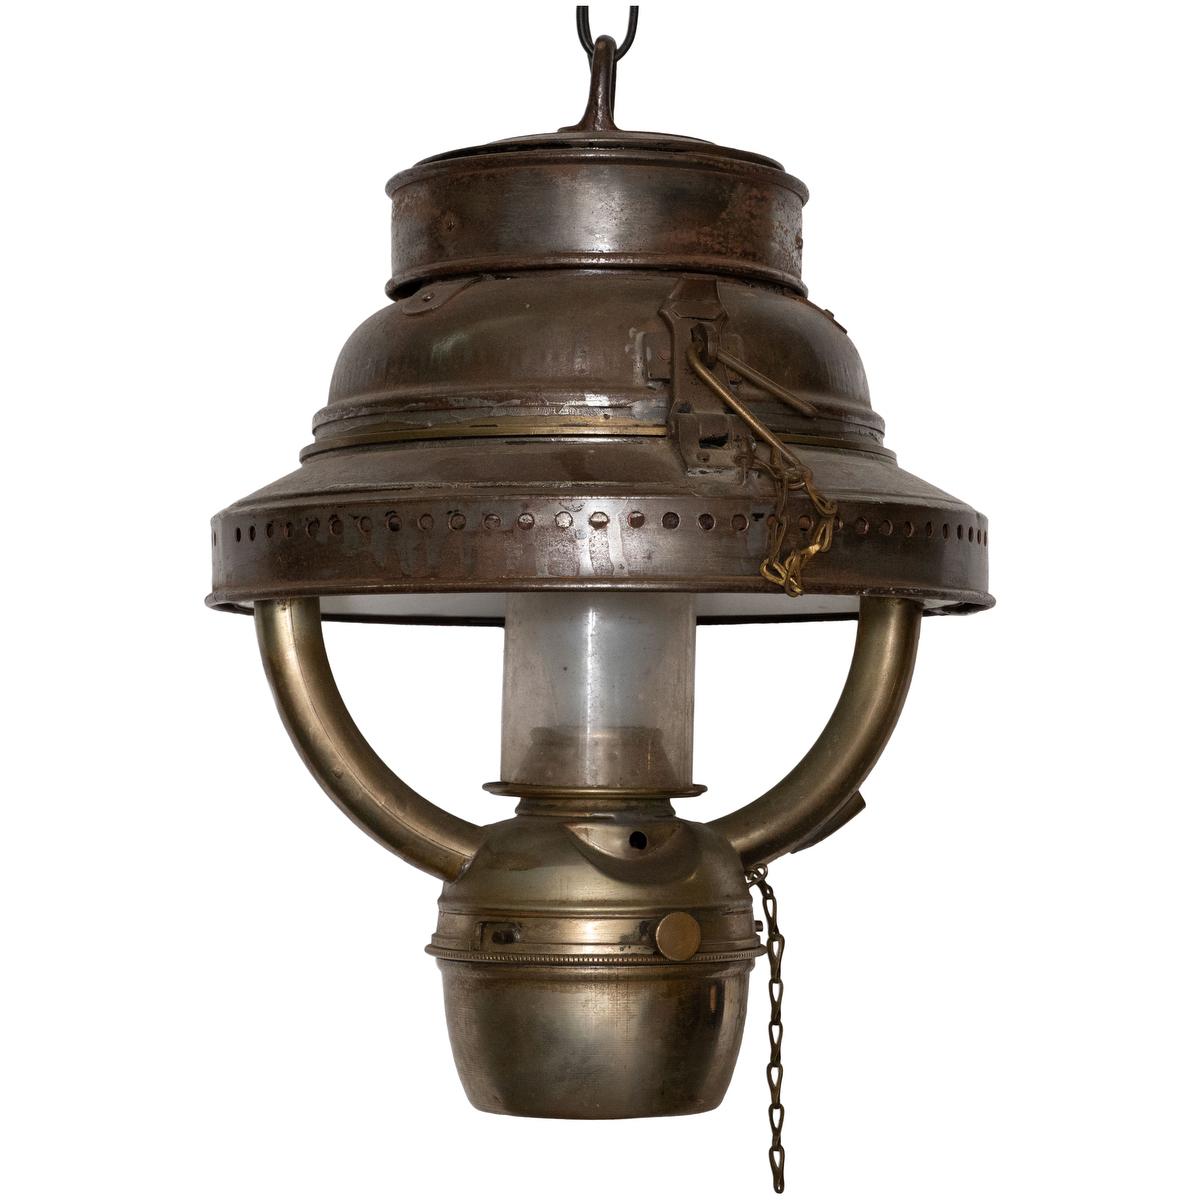 Vintage metal kerosene lantern with central glass shade retrofitted for electrified home use.